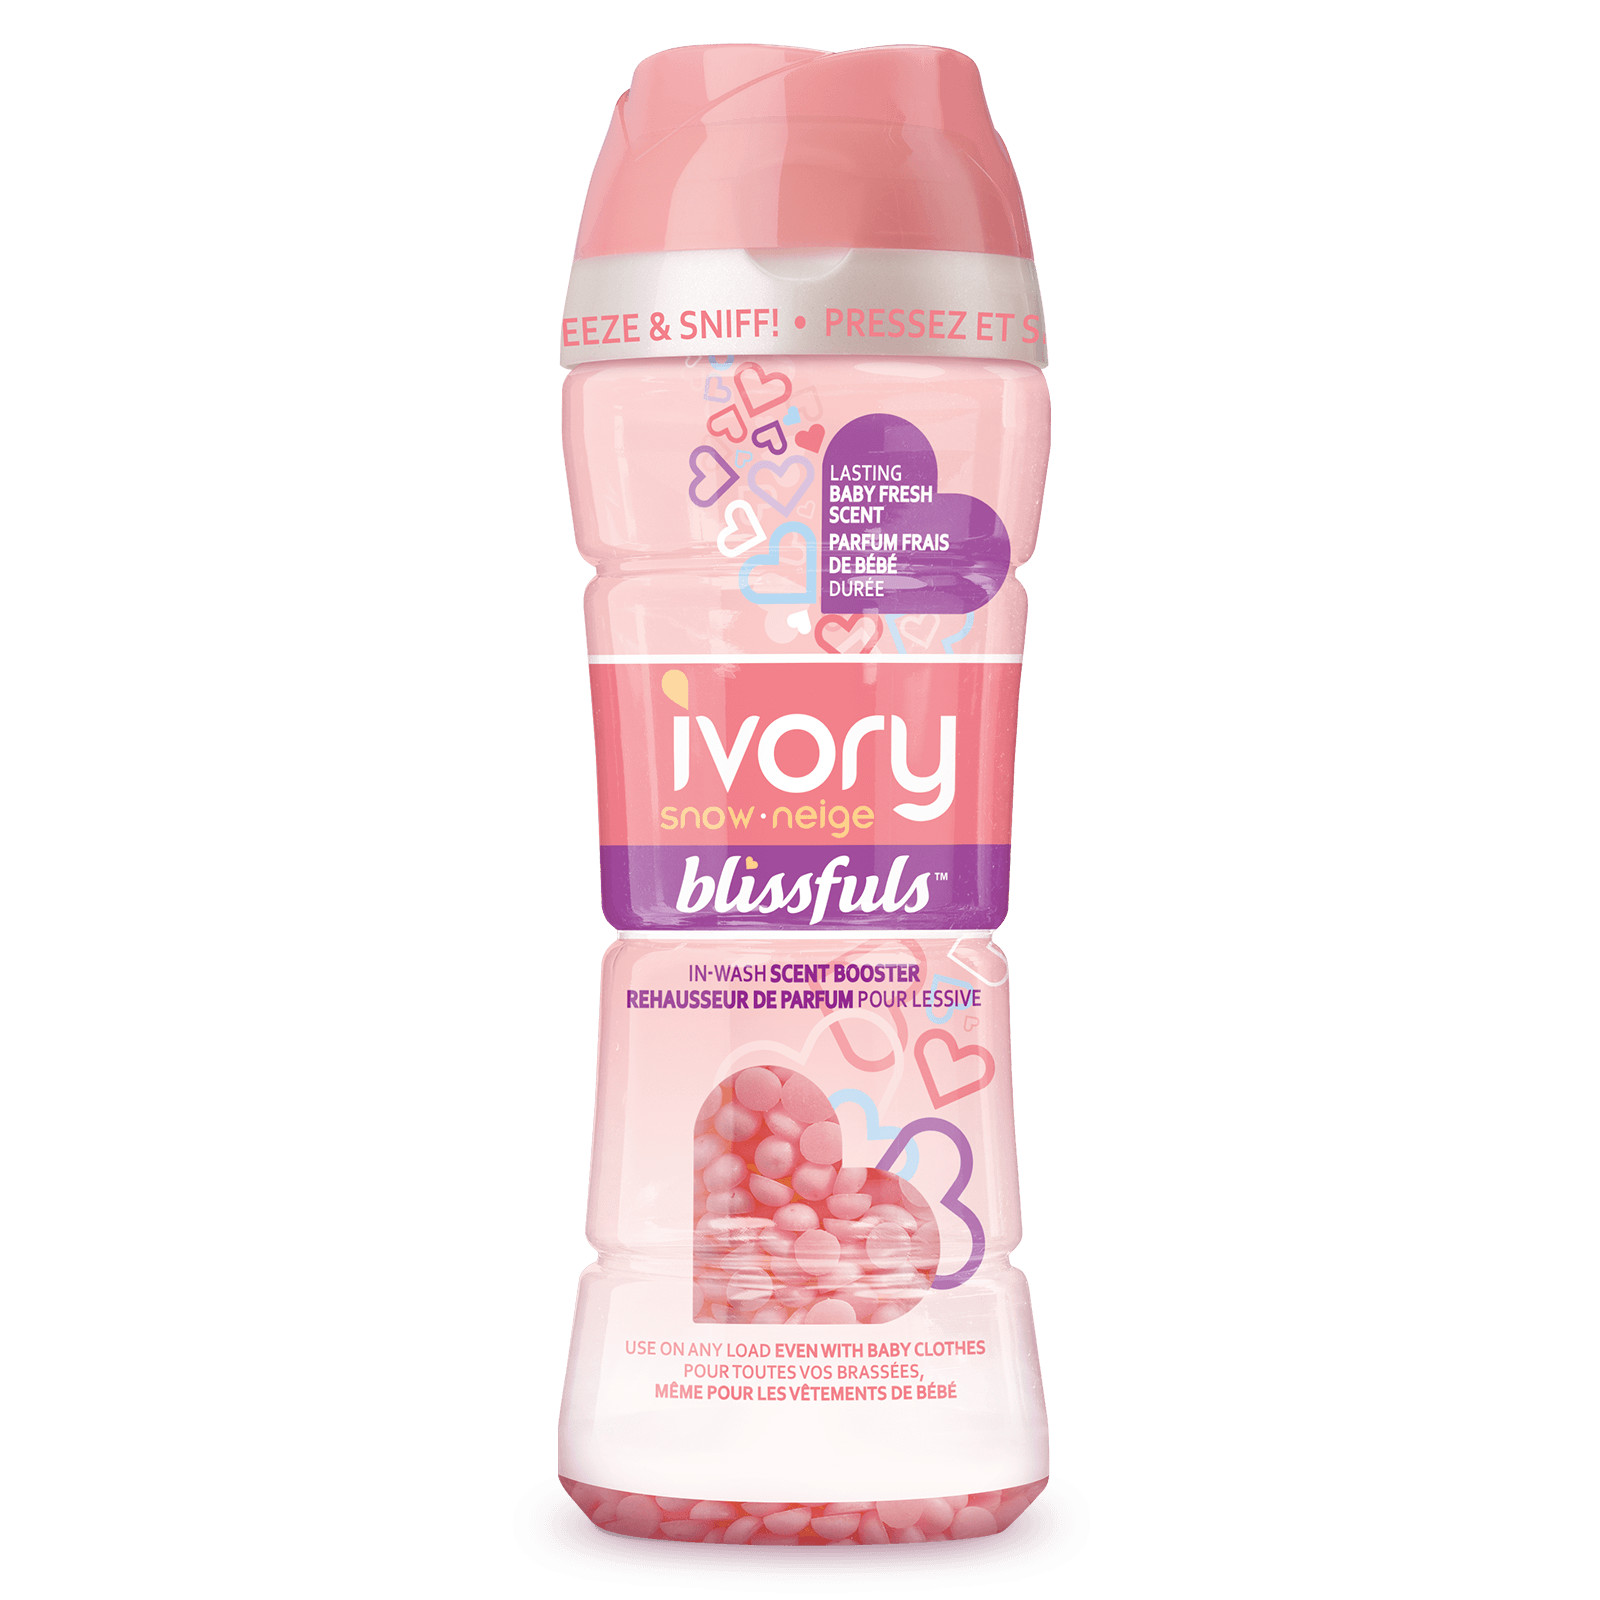 Ivory Snow Blissfuls In-Wash Scent Booster